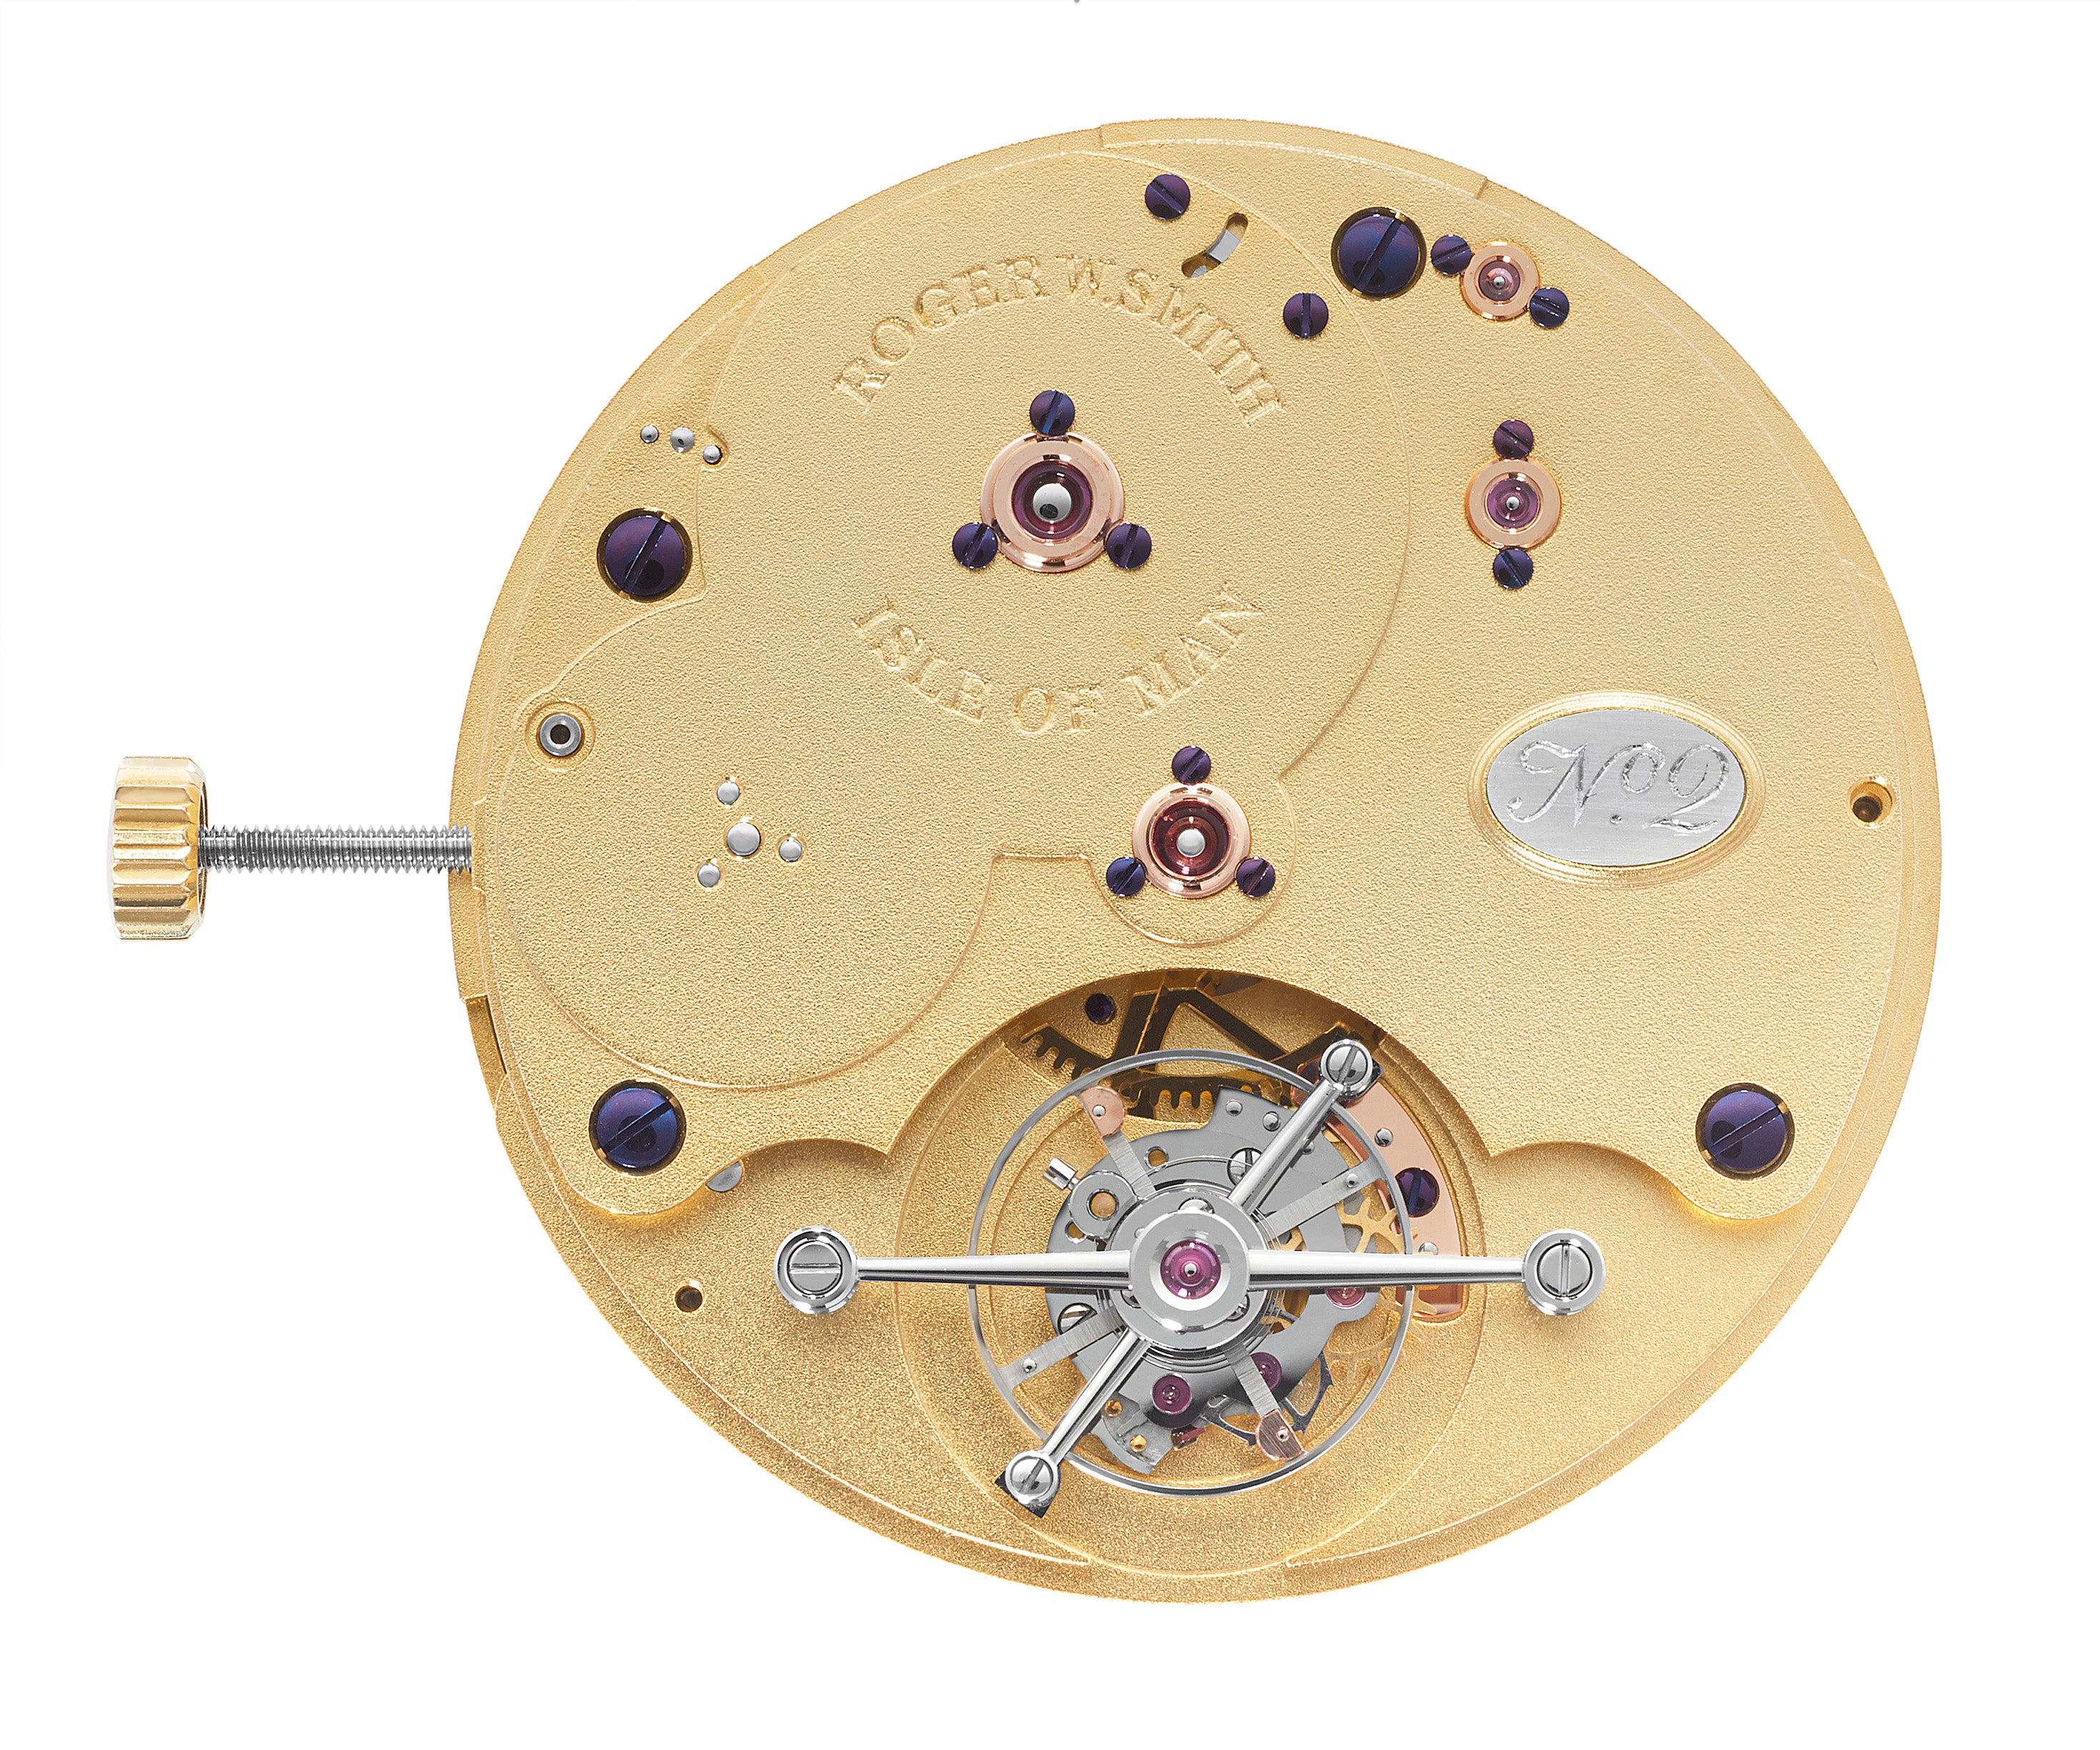 Roger W. Smith watchmaker tourbillon wristwatch number 2 movement for A Collected Man London